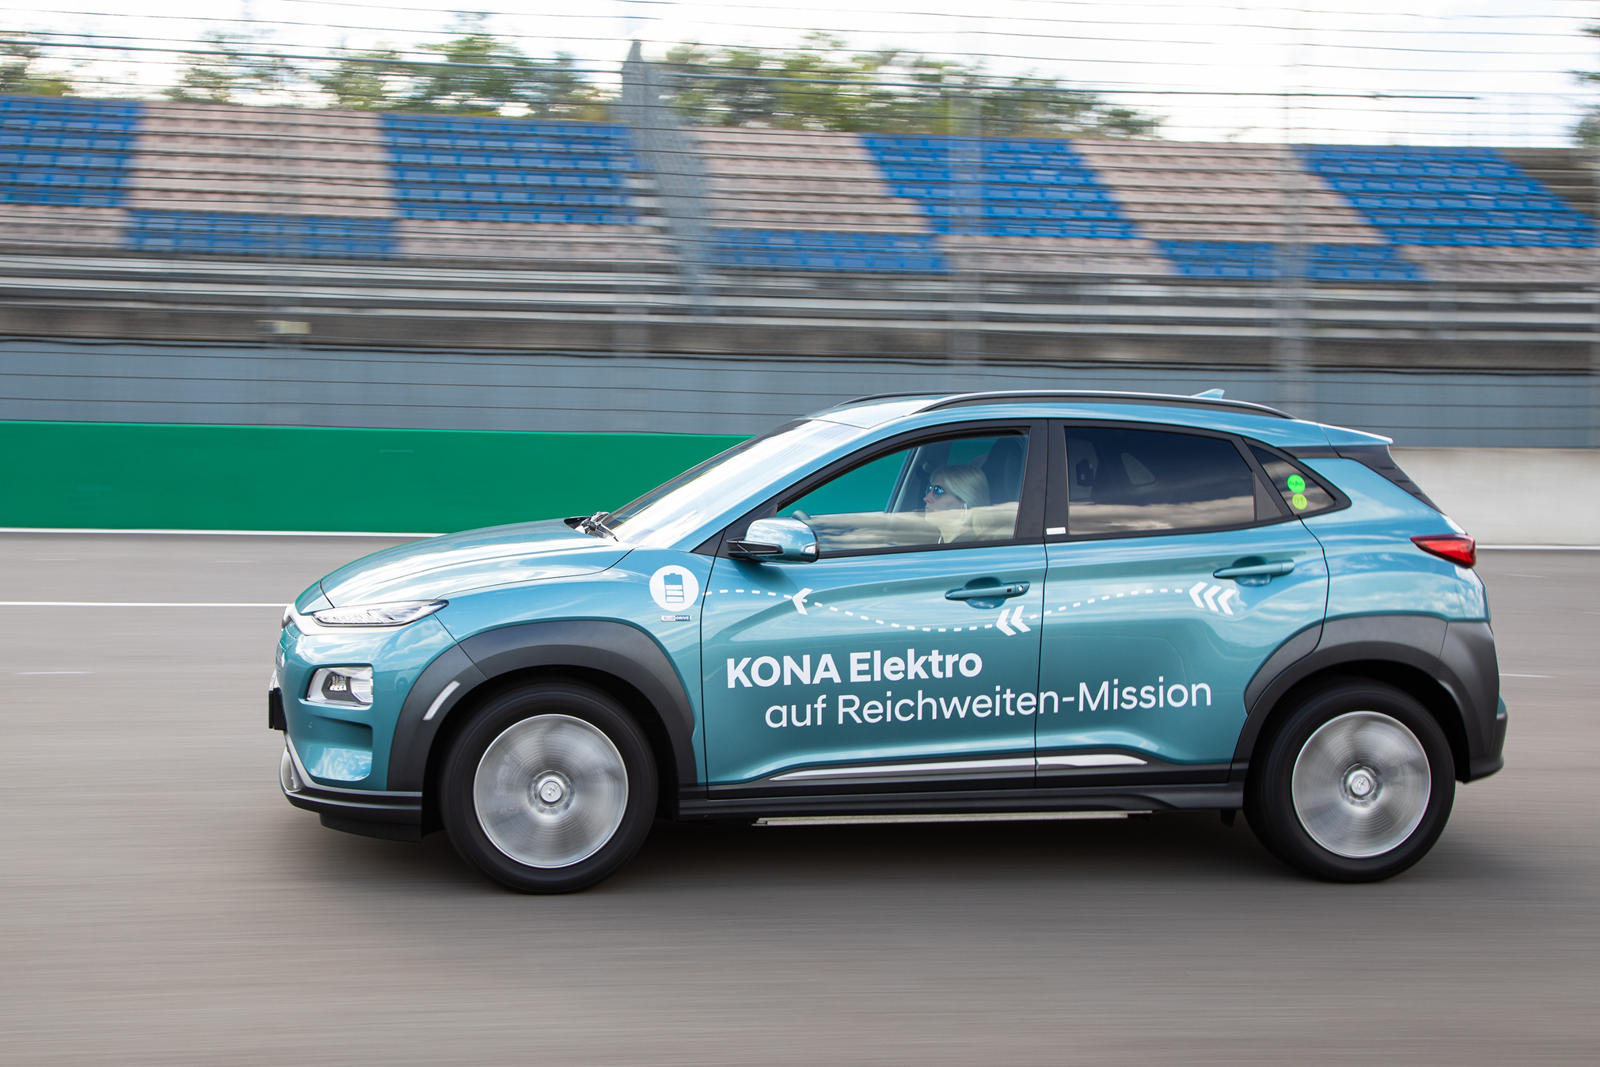 Hyundai S Kona Electric Suv Breaks 600 Miles On A Charge Carbuzz